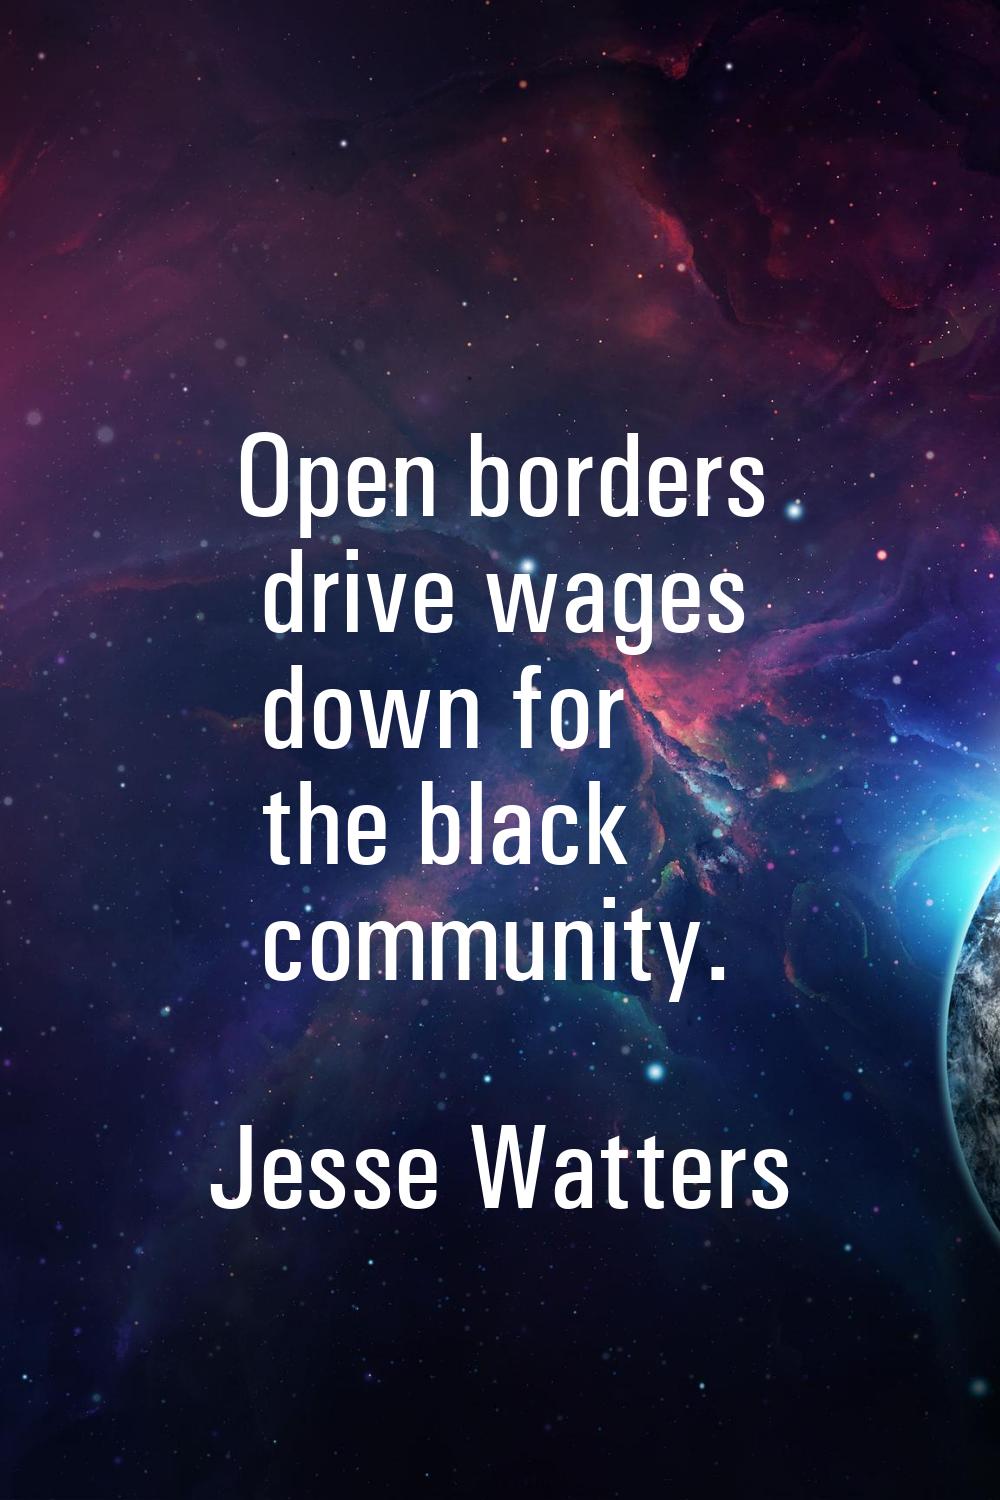 Open borders drive wages down for the black community.